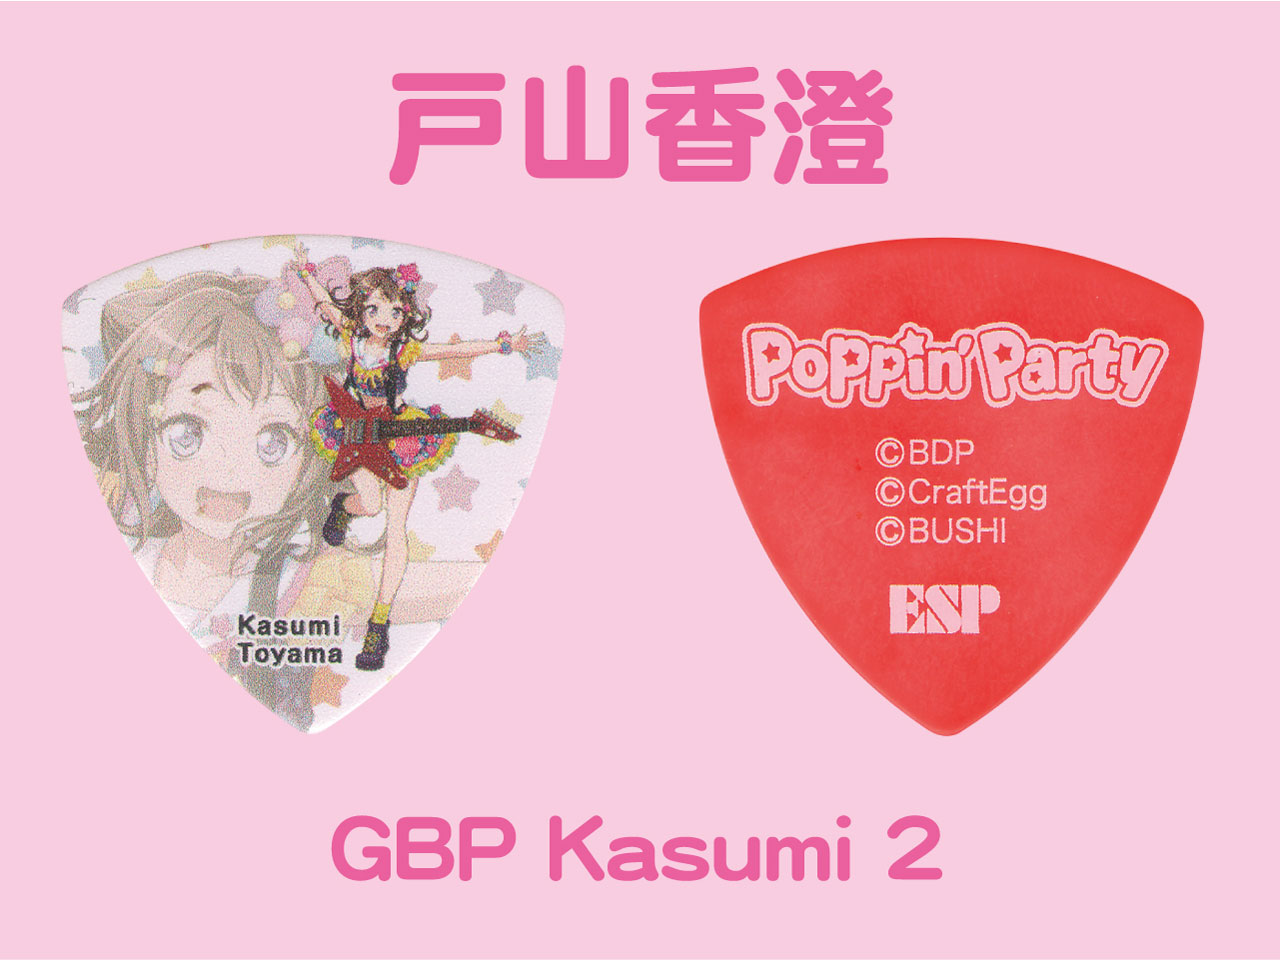 【ESP×BanG Dream!コラボピック】Poppin' Party Character Pick "戸山香澄"10枚セット（GBP Kasumi 2）